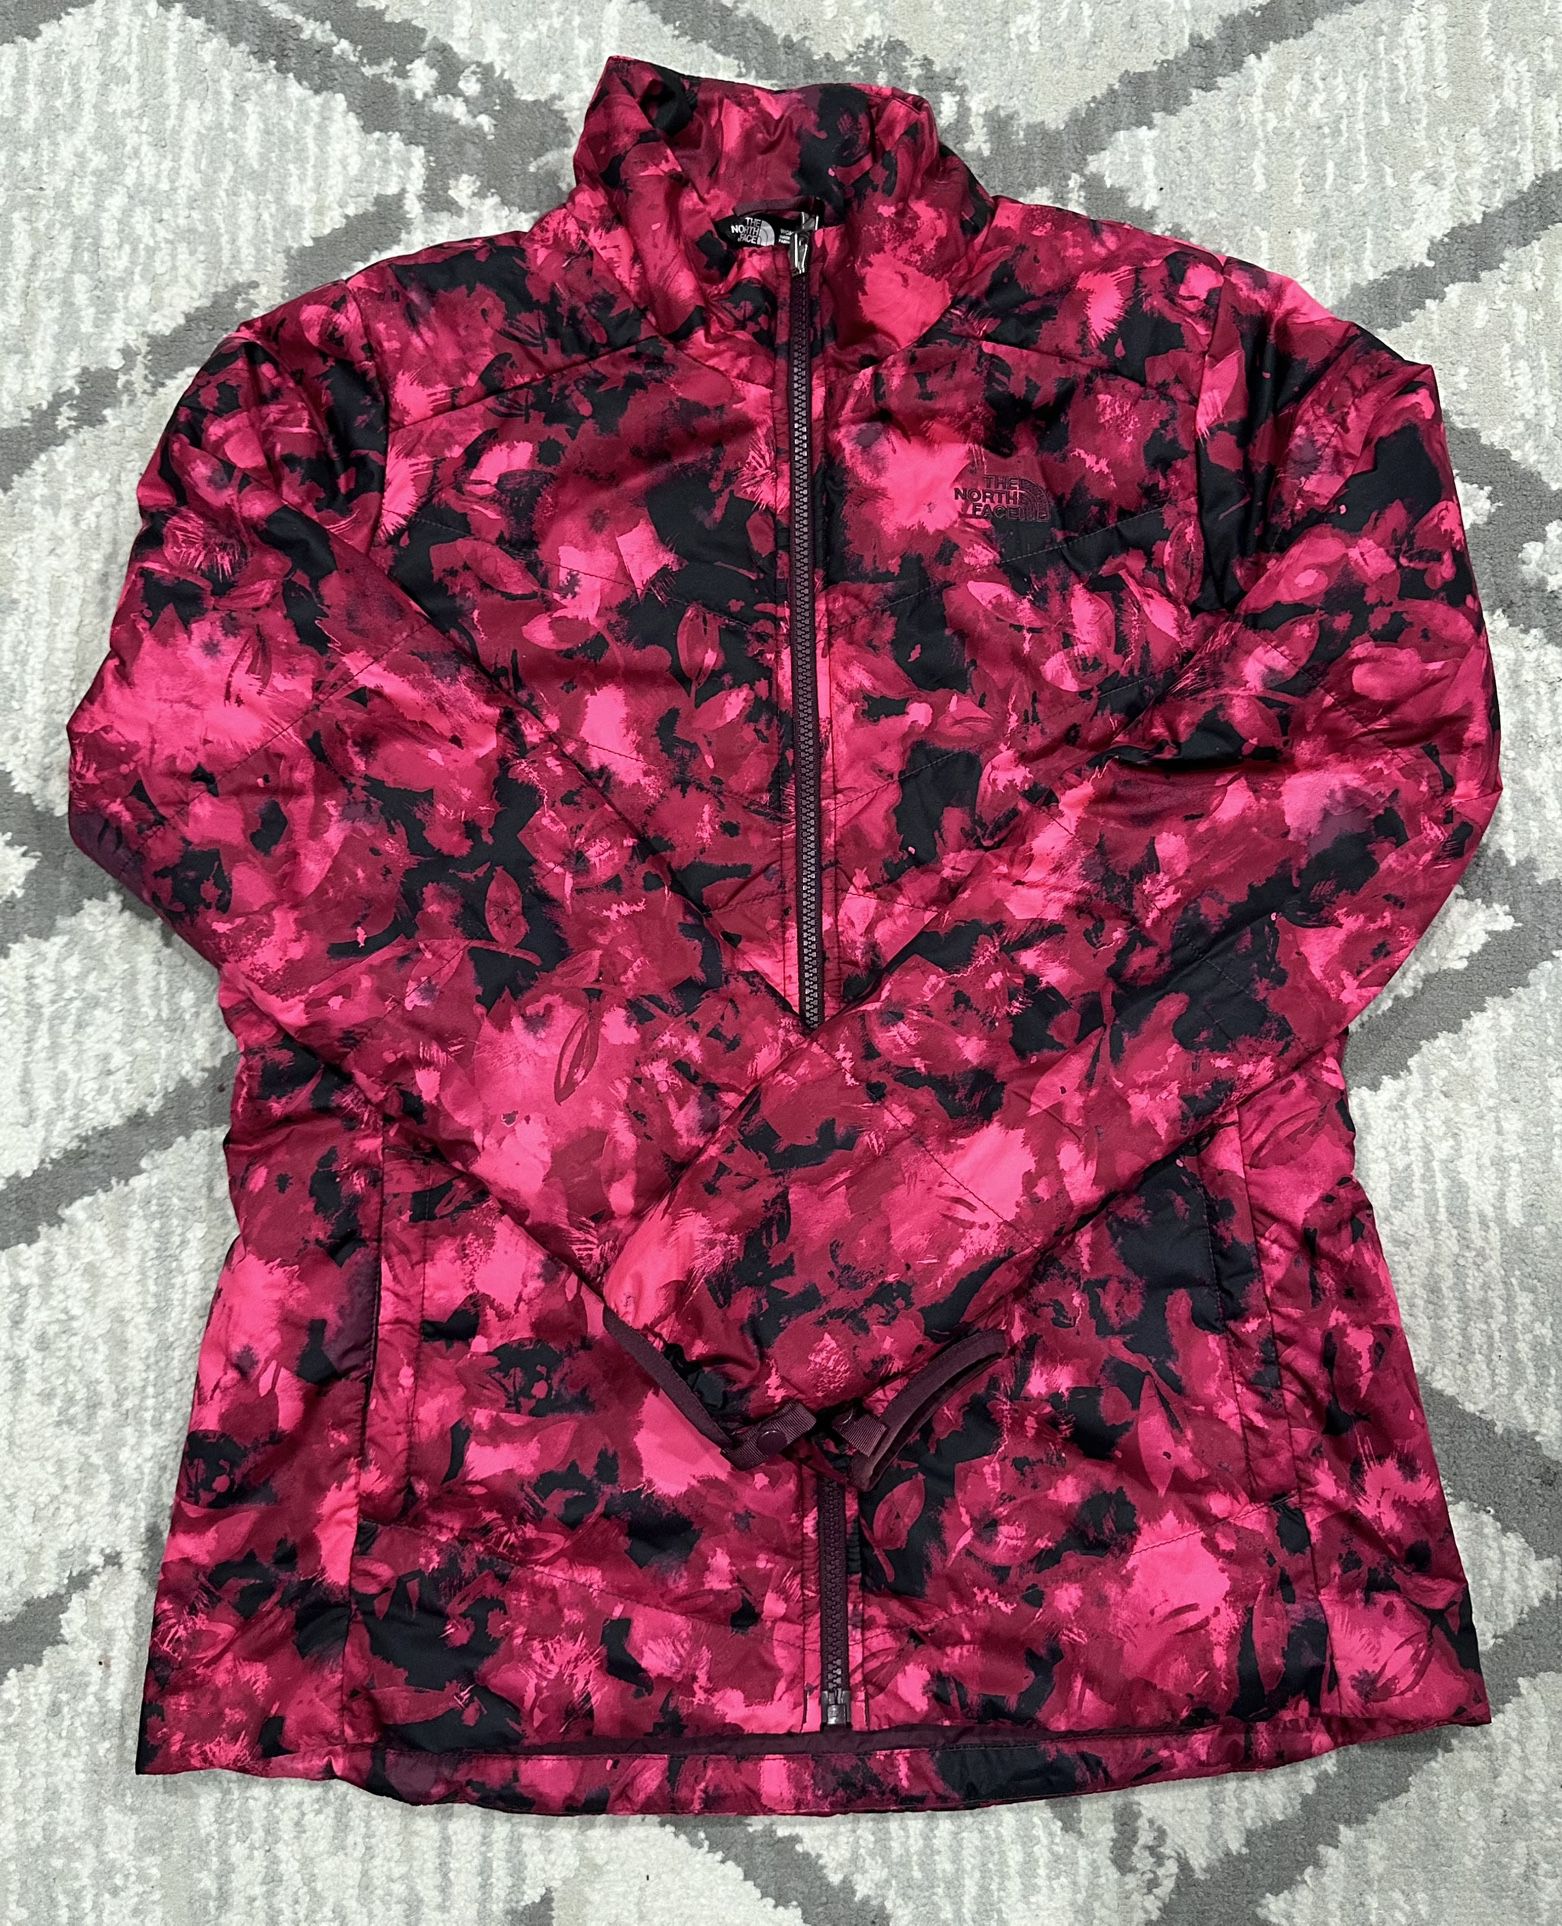 Women's North Face Jacket Size M